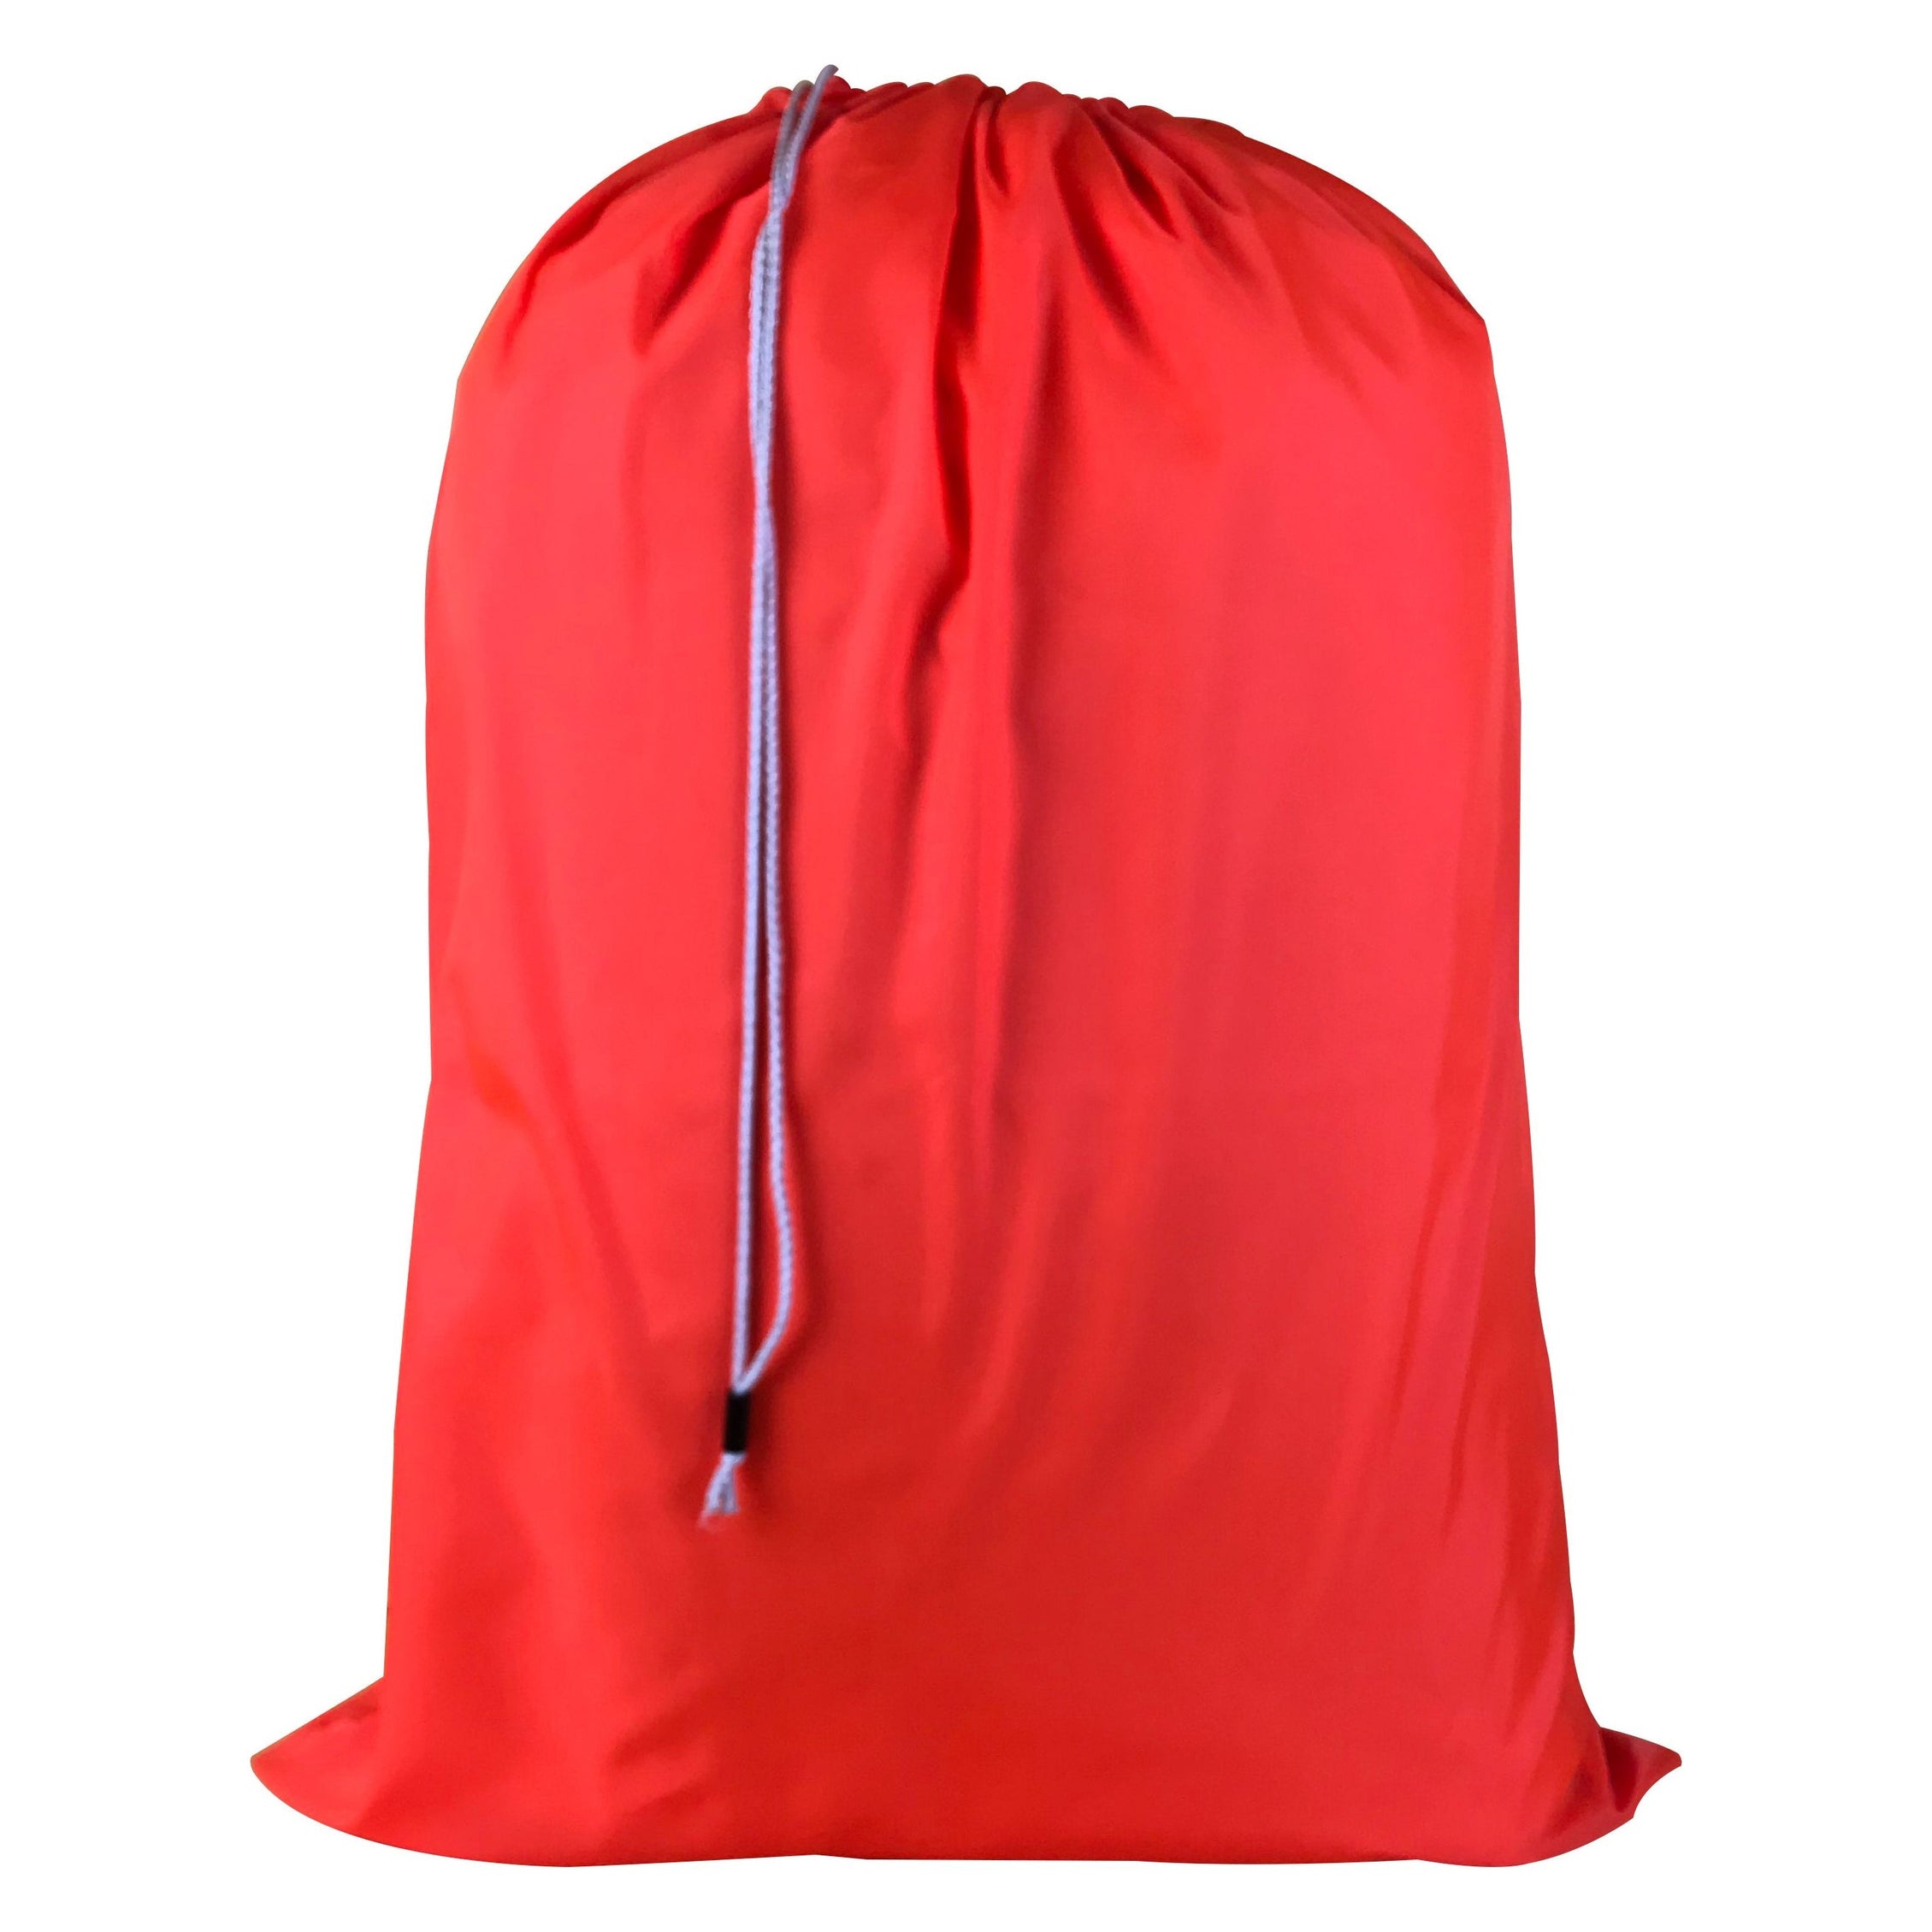 30" x 40" Heavy (210 Denier) Nylon Bags, Color Red, 50 pieces/box, Sold by the Box, Price for 1 bag - $3.95 each bag